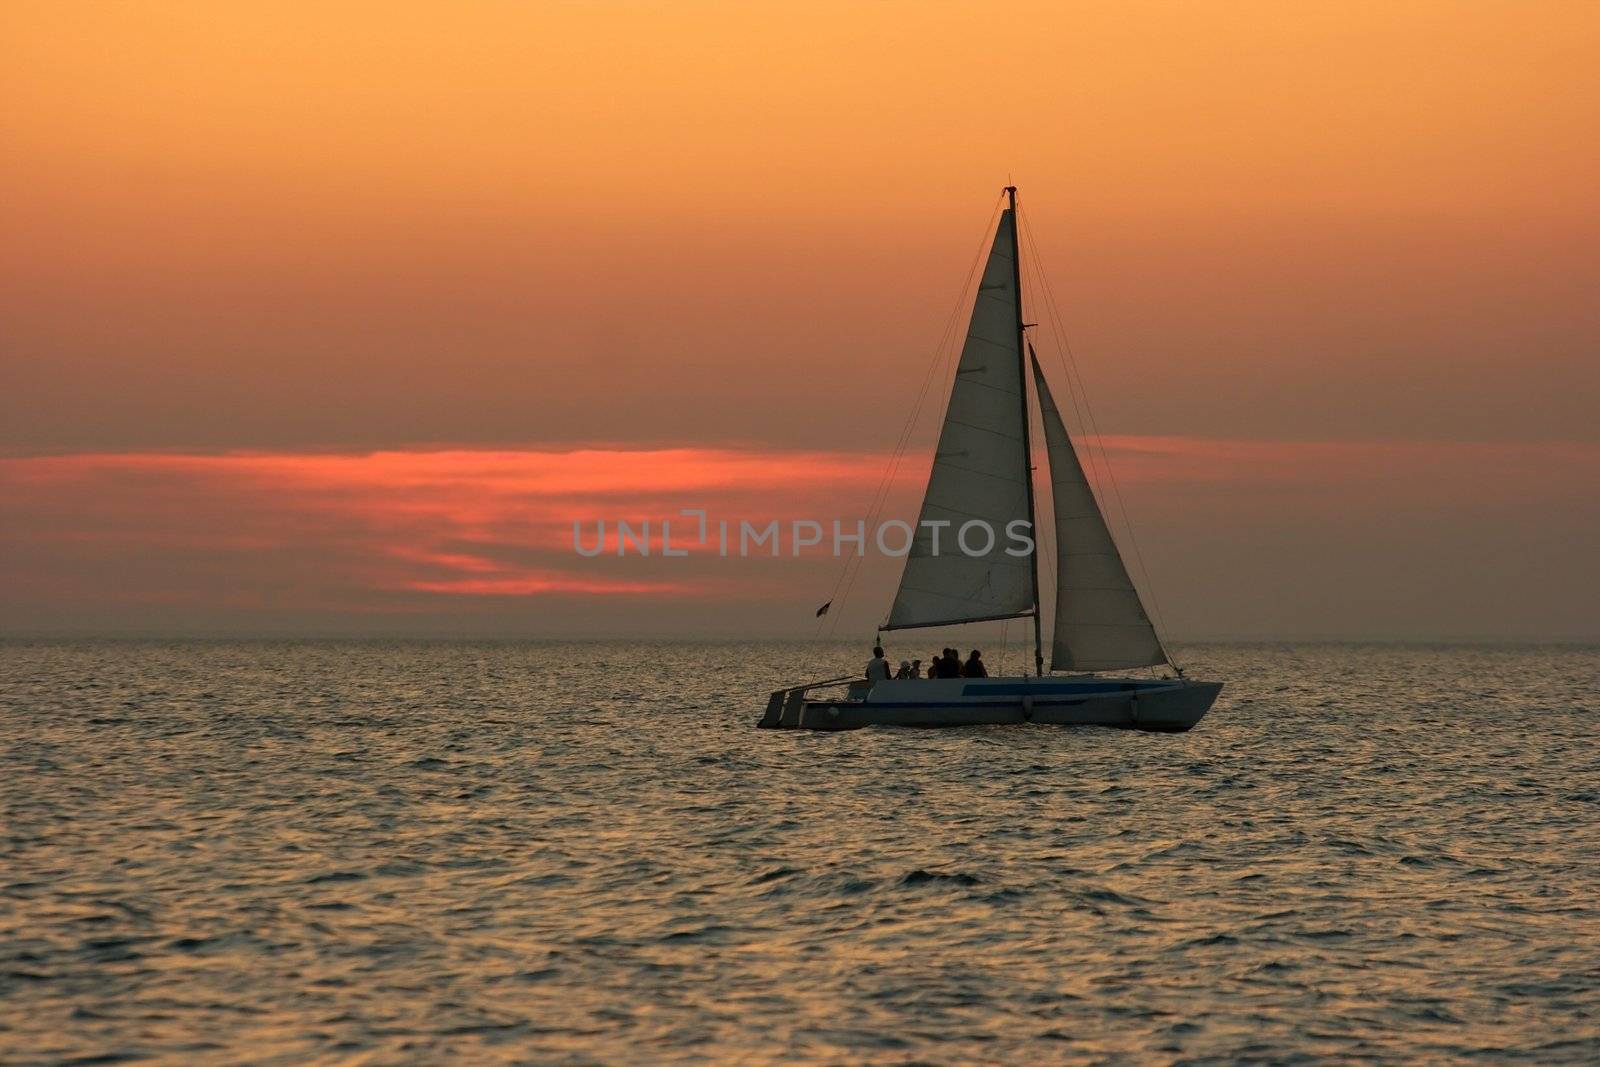 Sailing in the sunset
